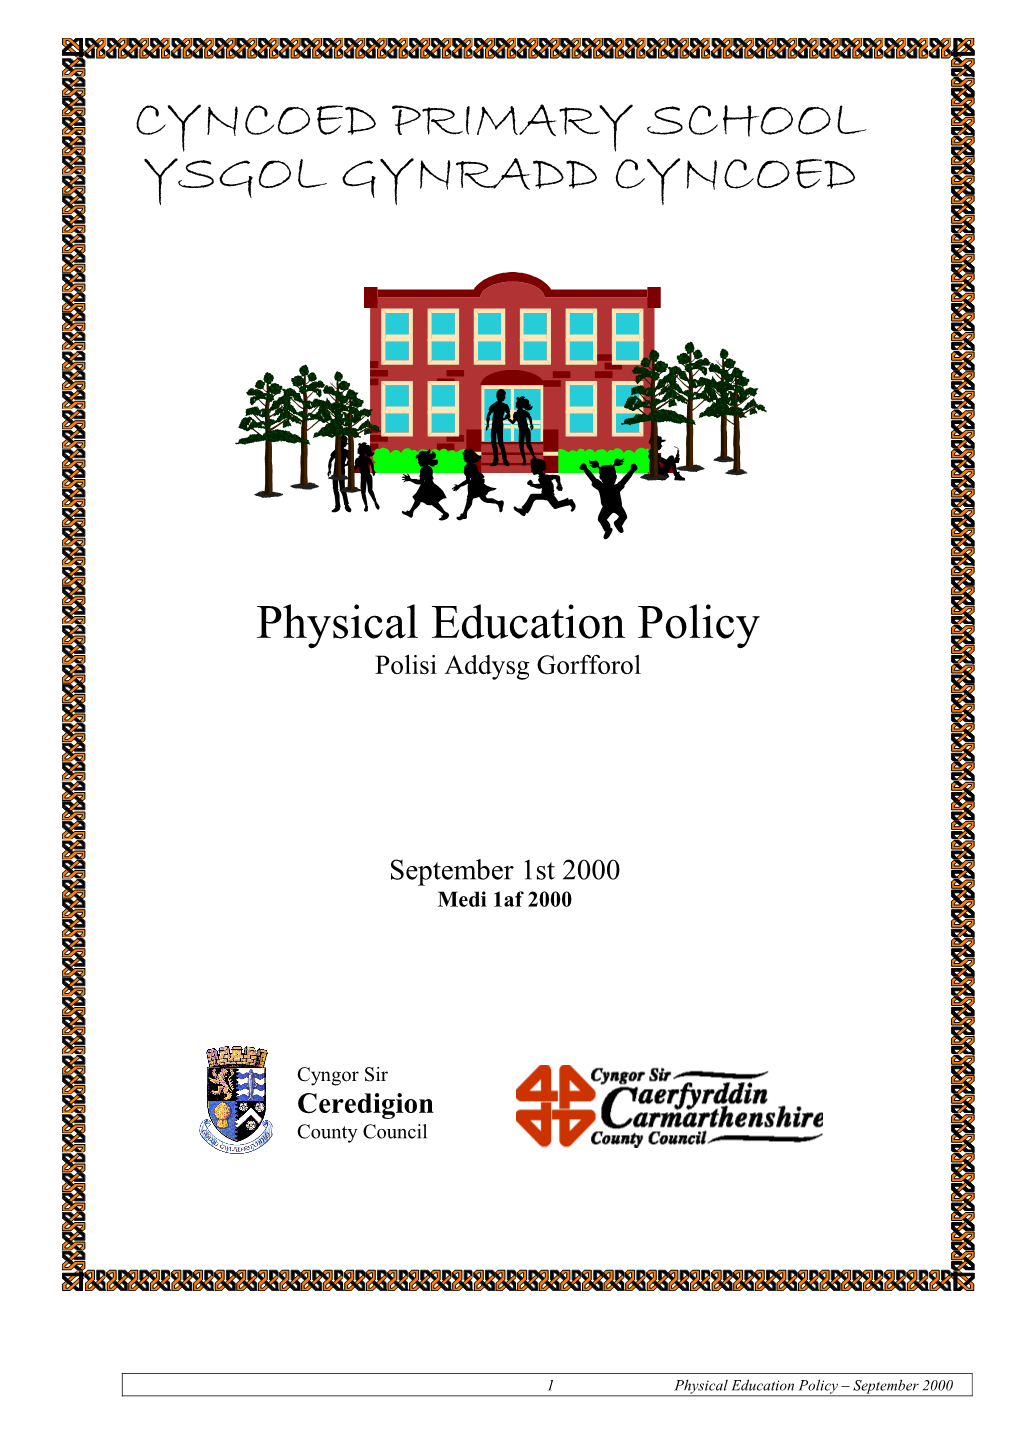 14 Physical Education Policy September 2000